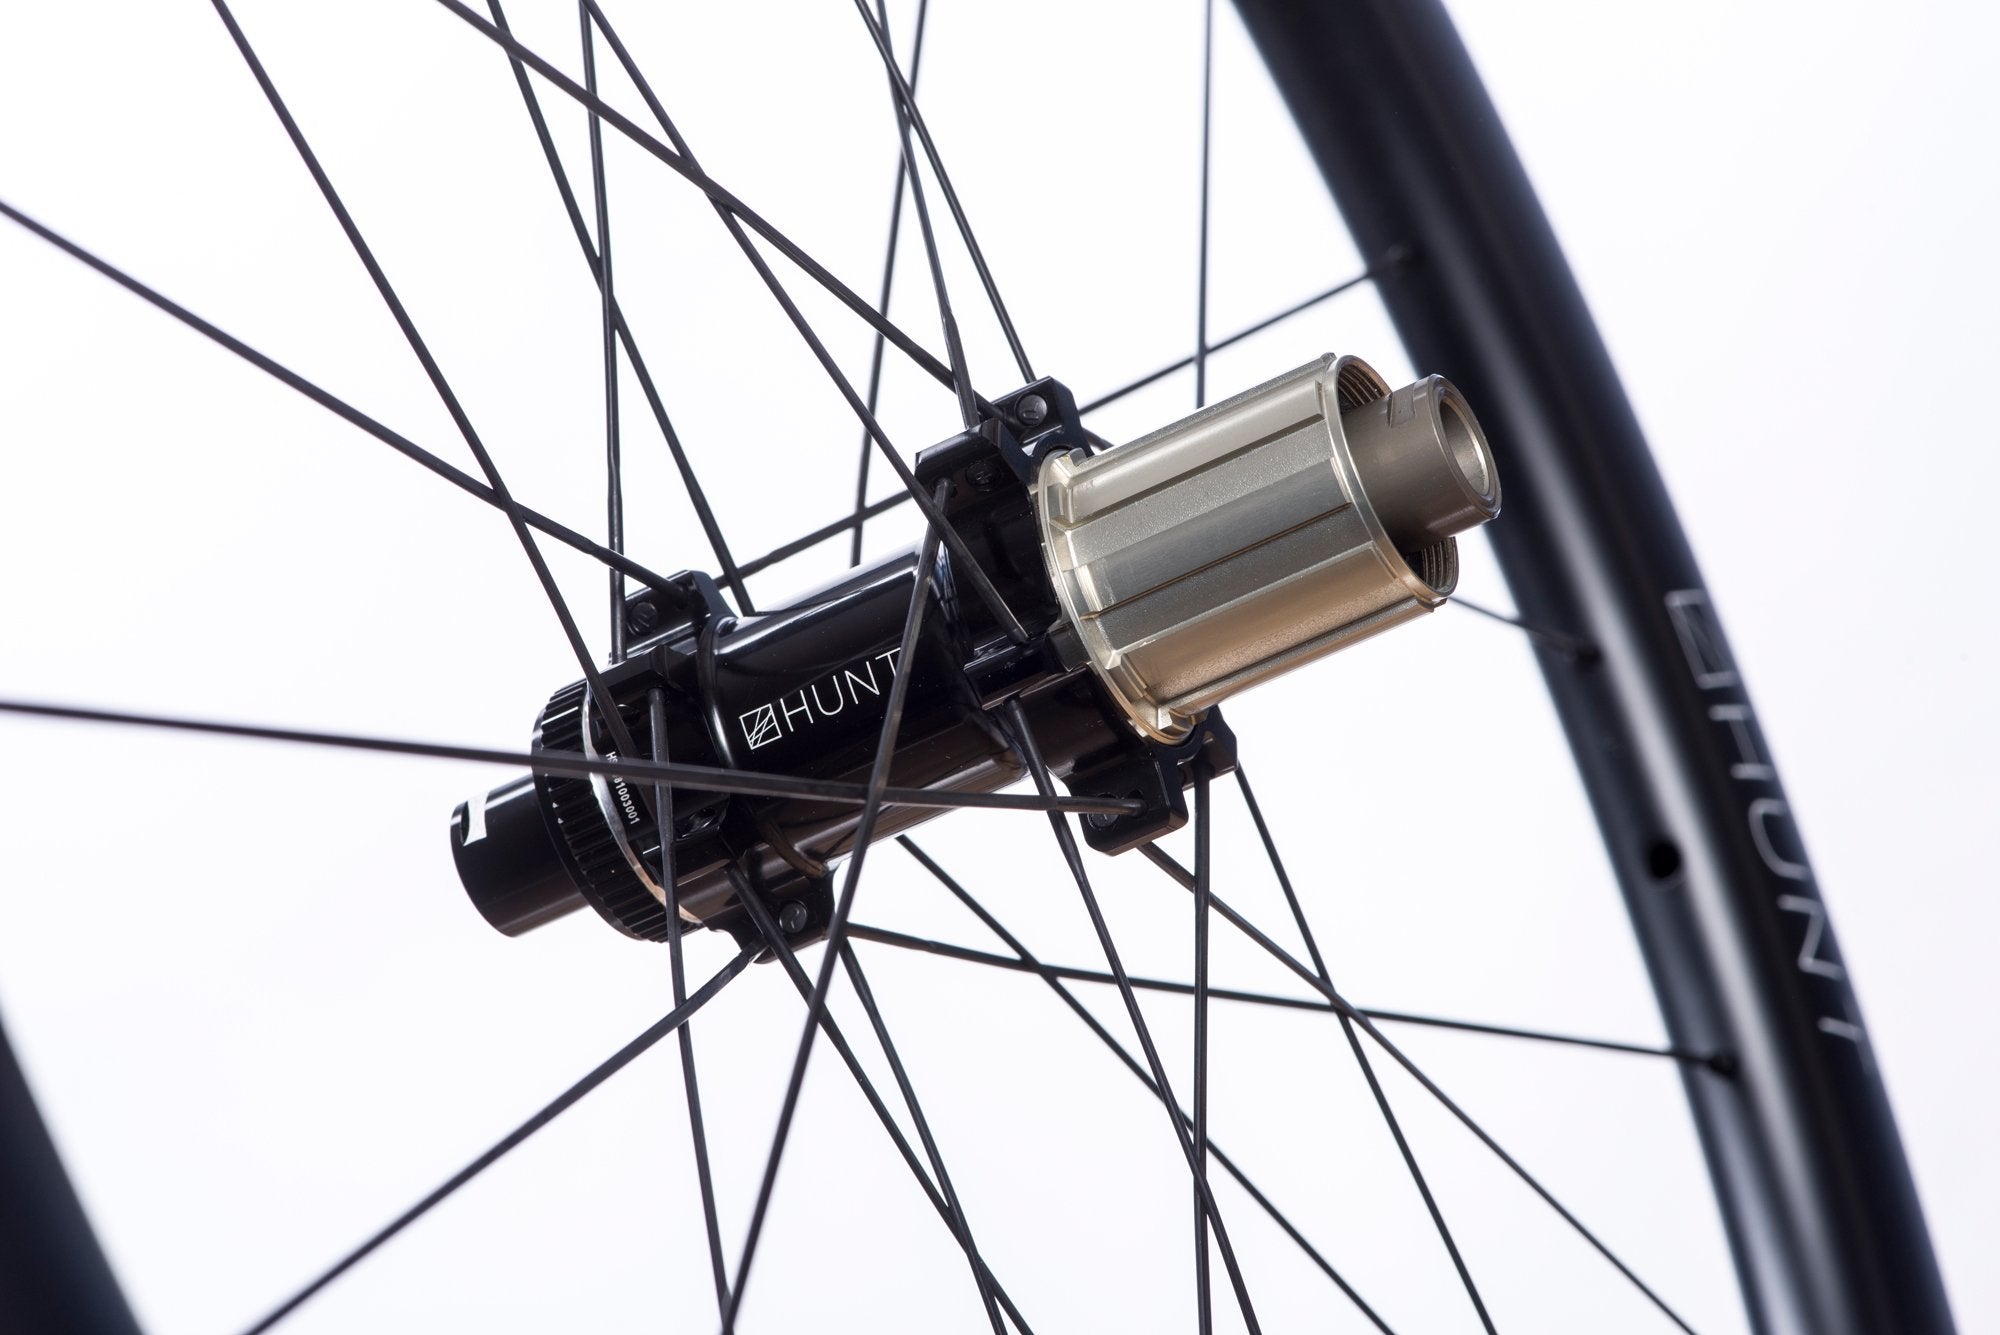 <h1>Freehub Body</h1><i>Featuring a 3 multi-point pawls with 3 teeth each and a 48 tooth ratchet ring results in an impressively low 7.5 degree engagement angle and excellent resistance to wear under heavy loads. The Sprint freehub has strong individual pawl springs which engage quicker. There is also a Steel Spline Insert re-enforcement to provide excellent durability against cassette sprocket damage often seen on standard alloy freehub bodies.</i>